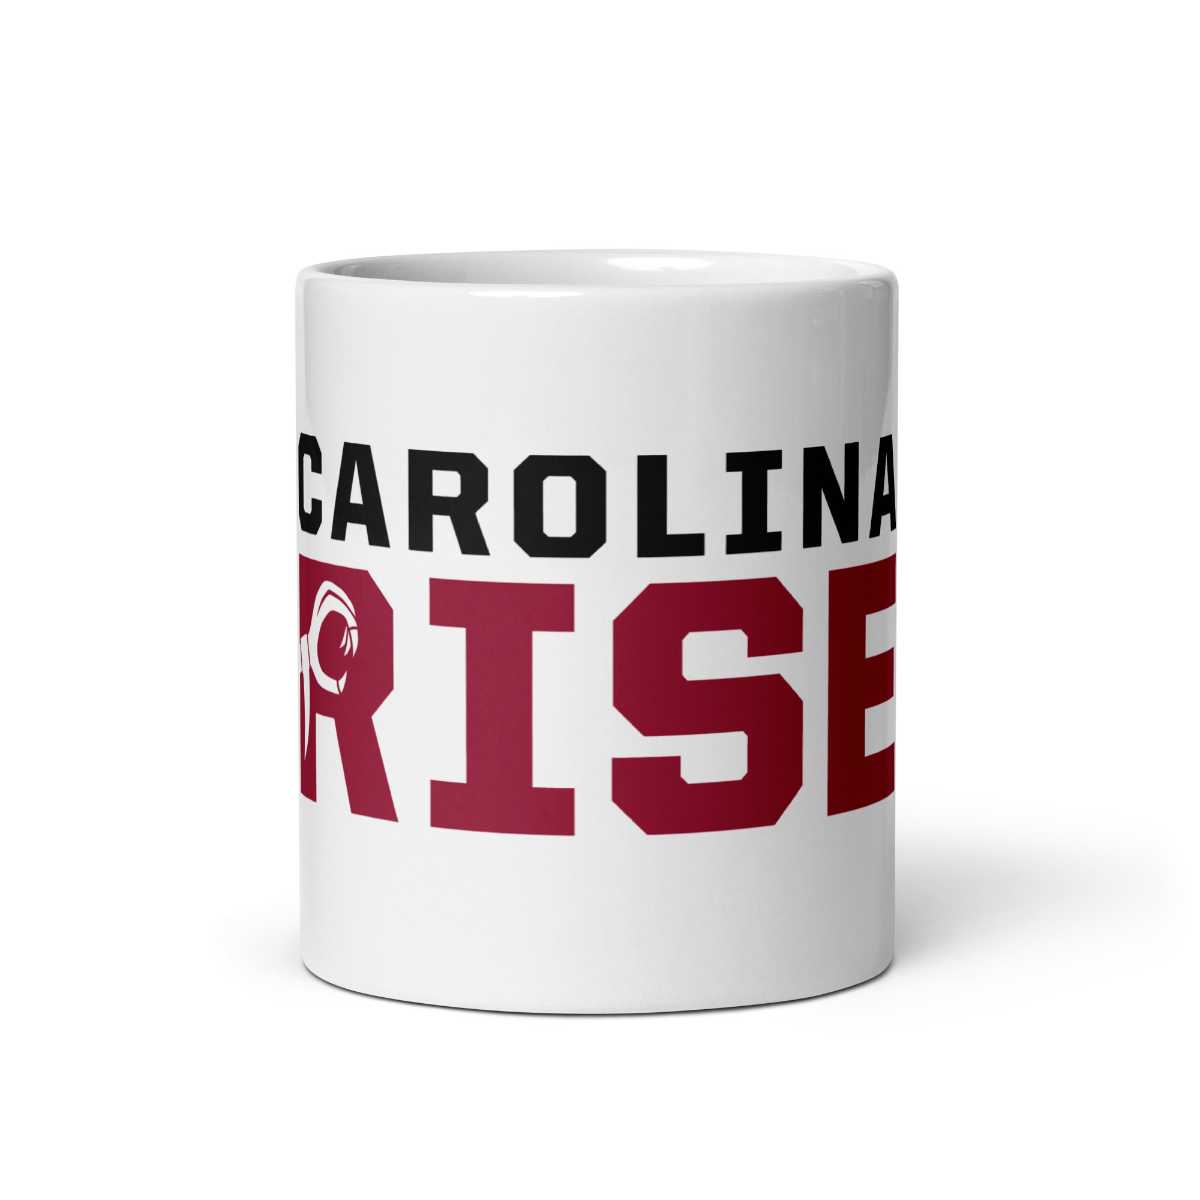 Stocking Stuffers for Everyone - Collectively Carolina